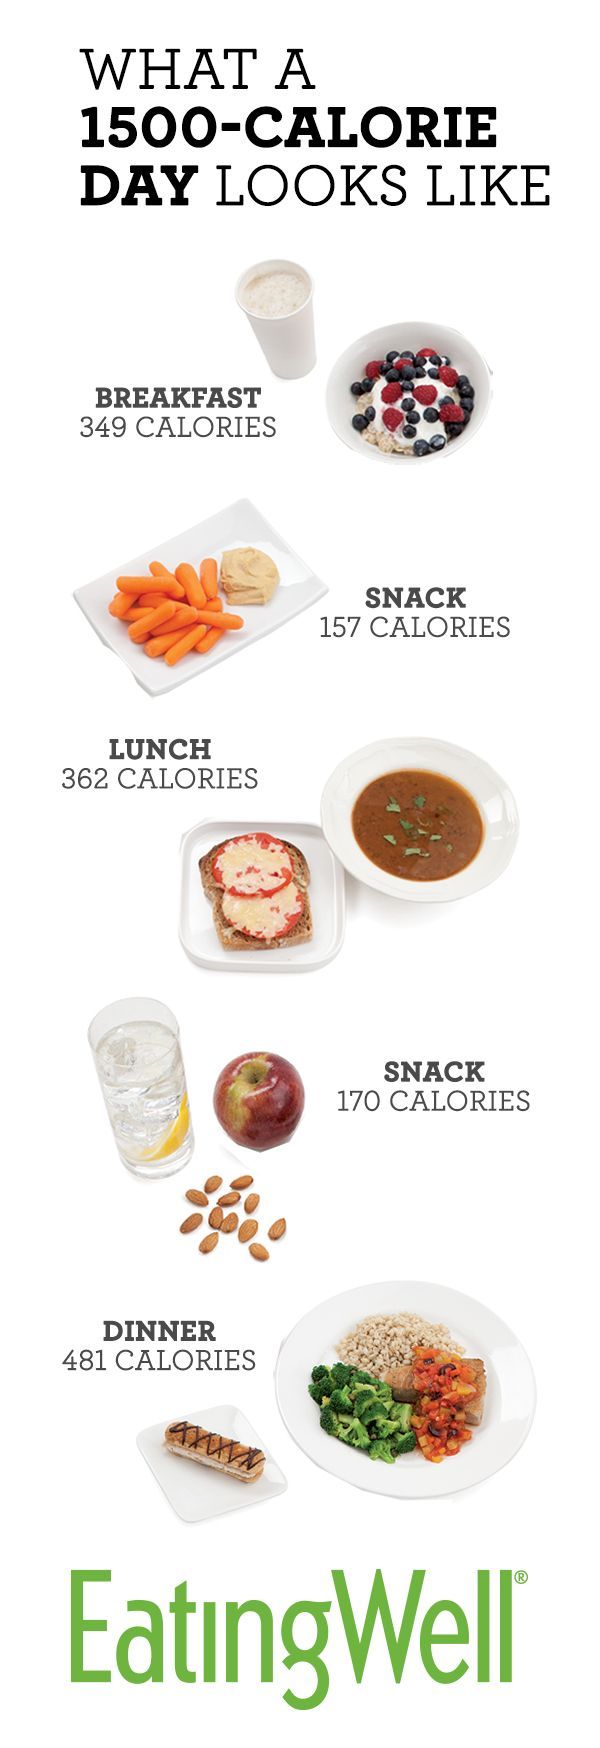 What Does a 1,500-Calorie Day Look Like? -   9 military diet pictures
 ideas